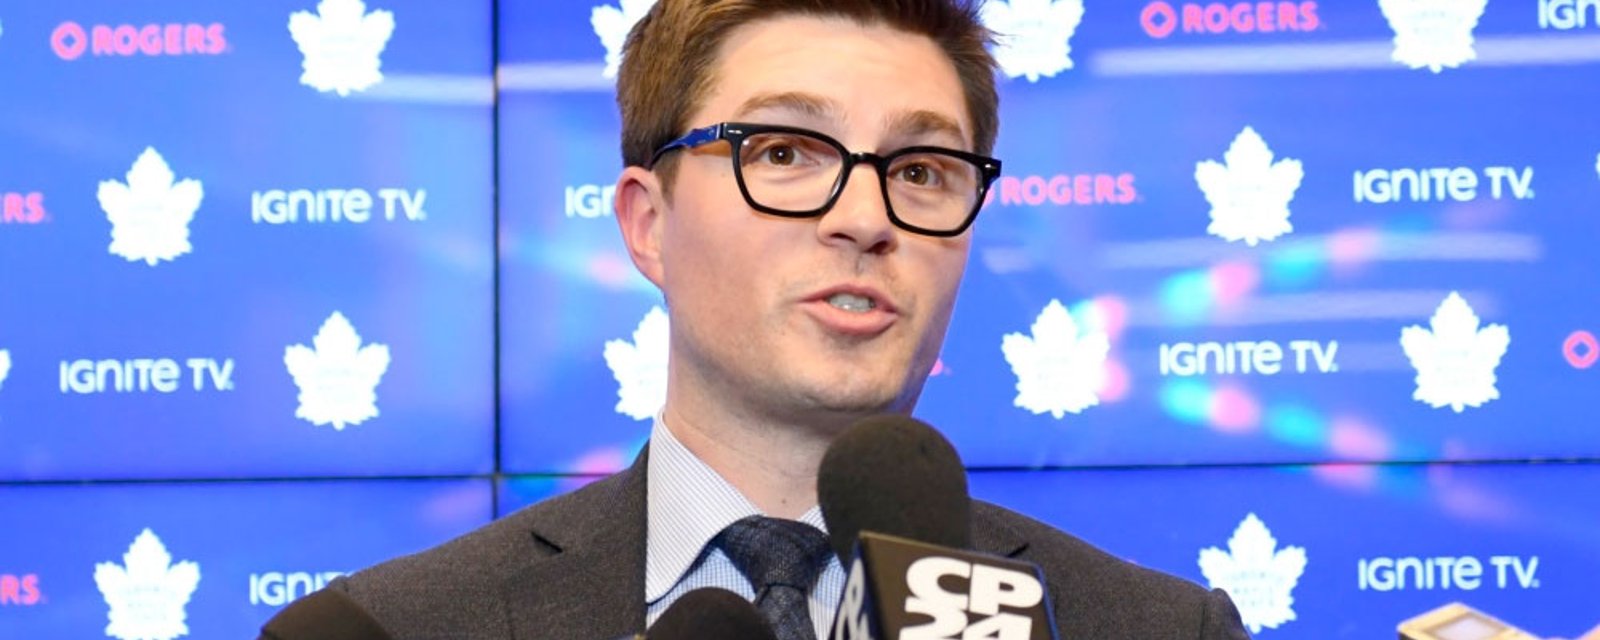 Dubas working behind the scenes to lock up an important piece of the Leafs’ core